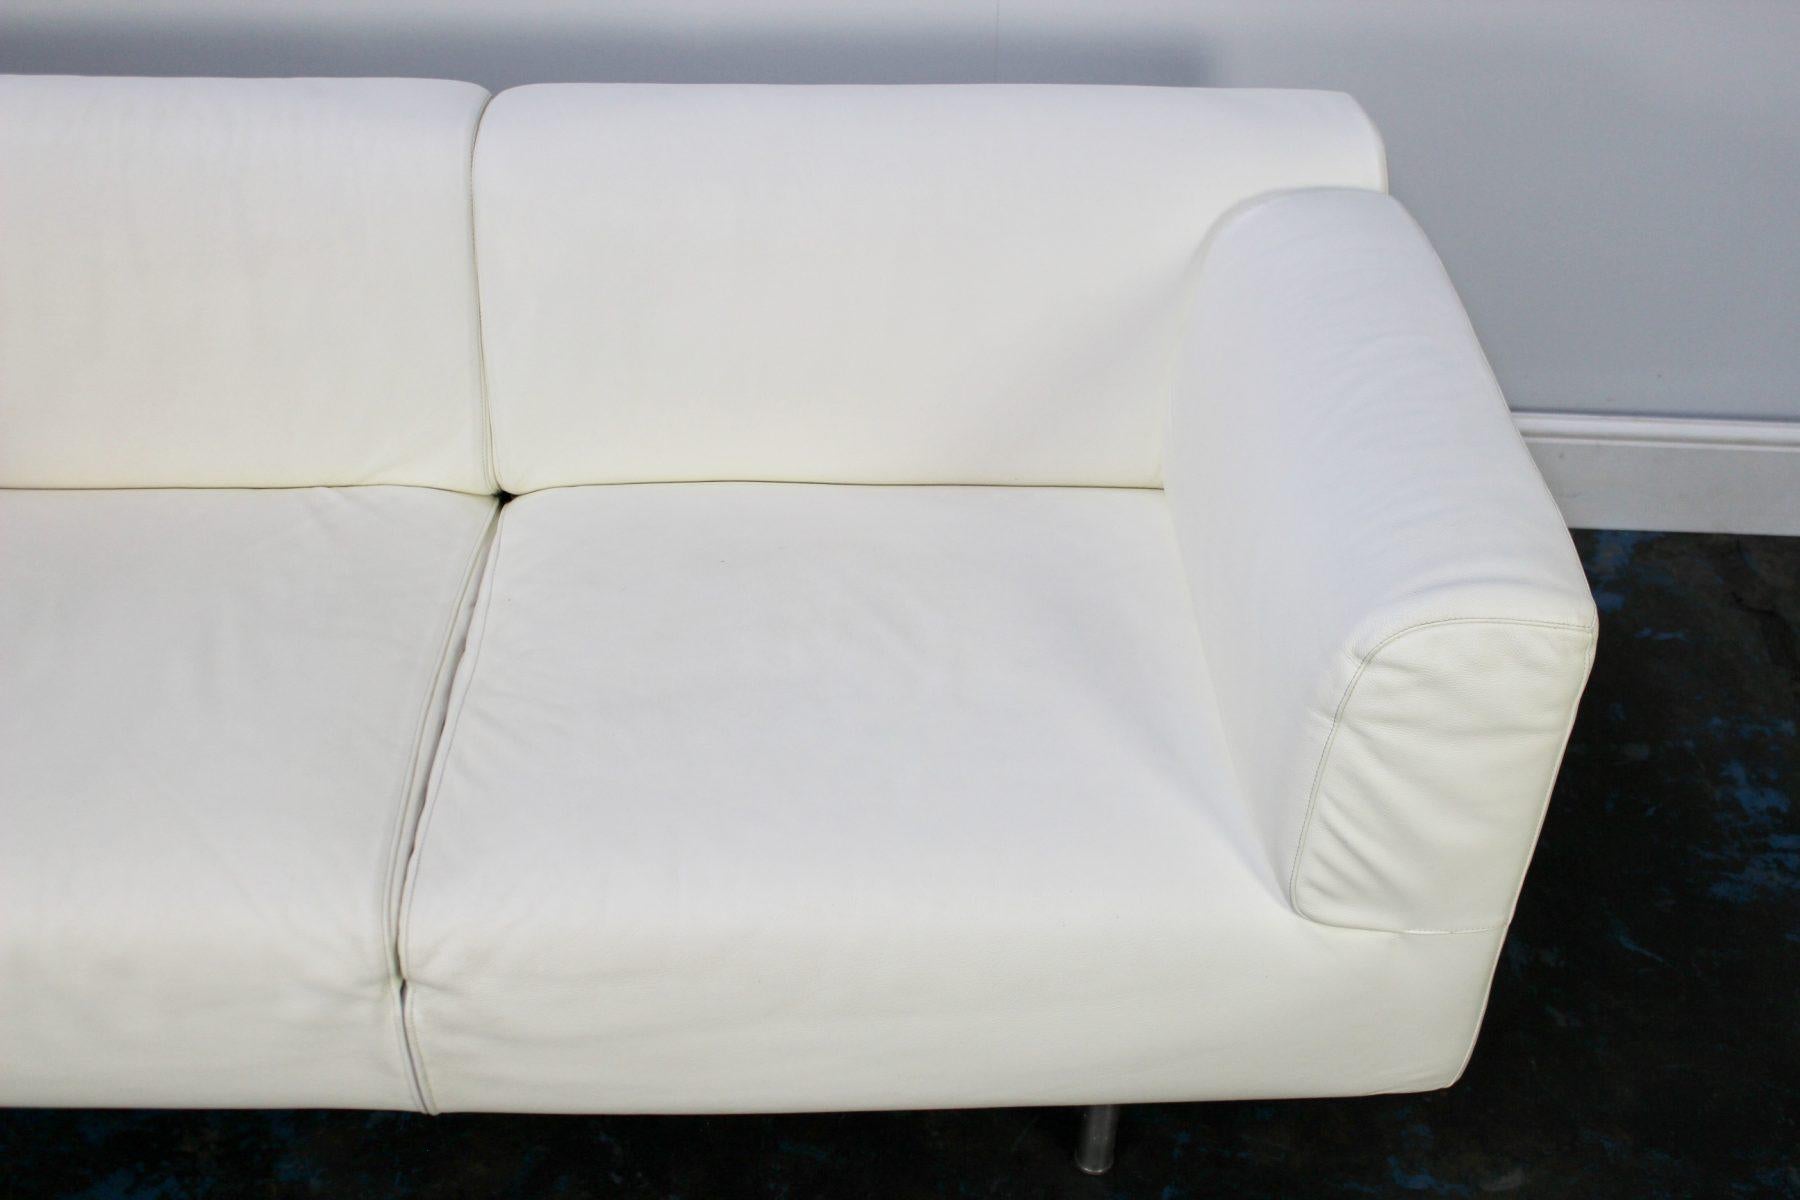 Cassina “250 Met” Large 2-Seat Sofa in Chalk White Leather For Sale 5